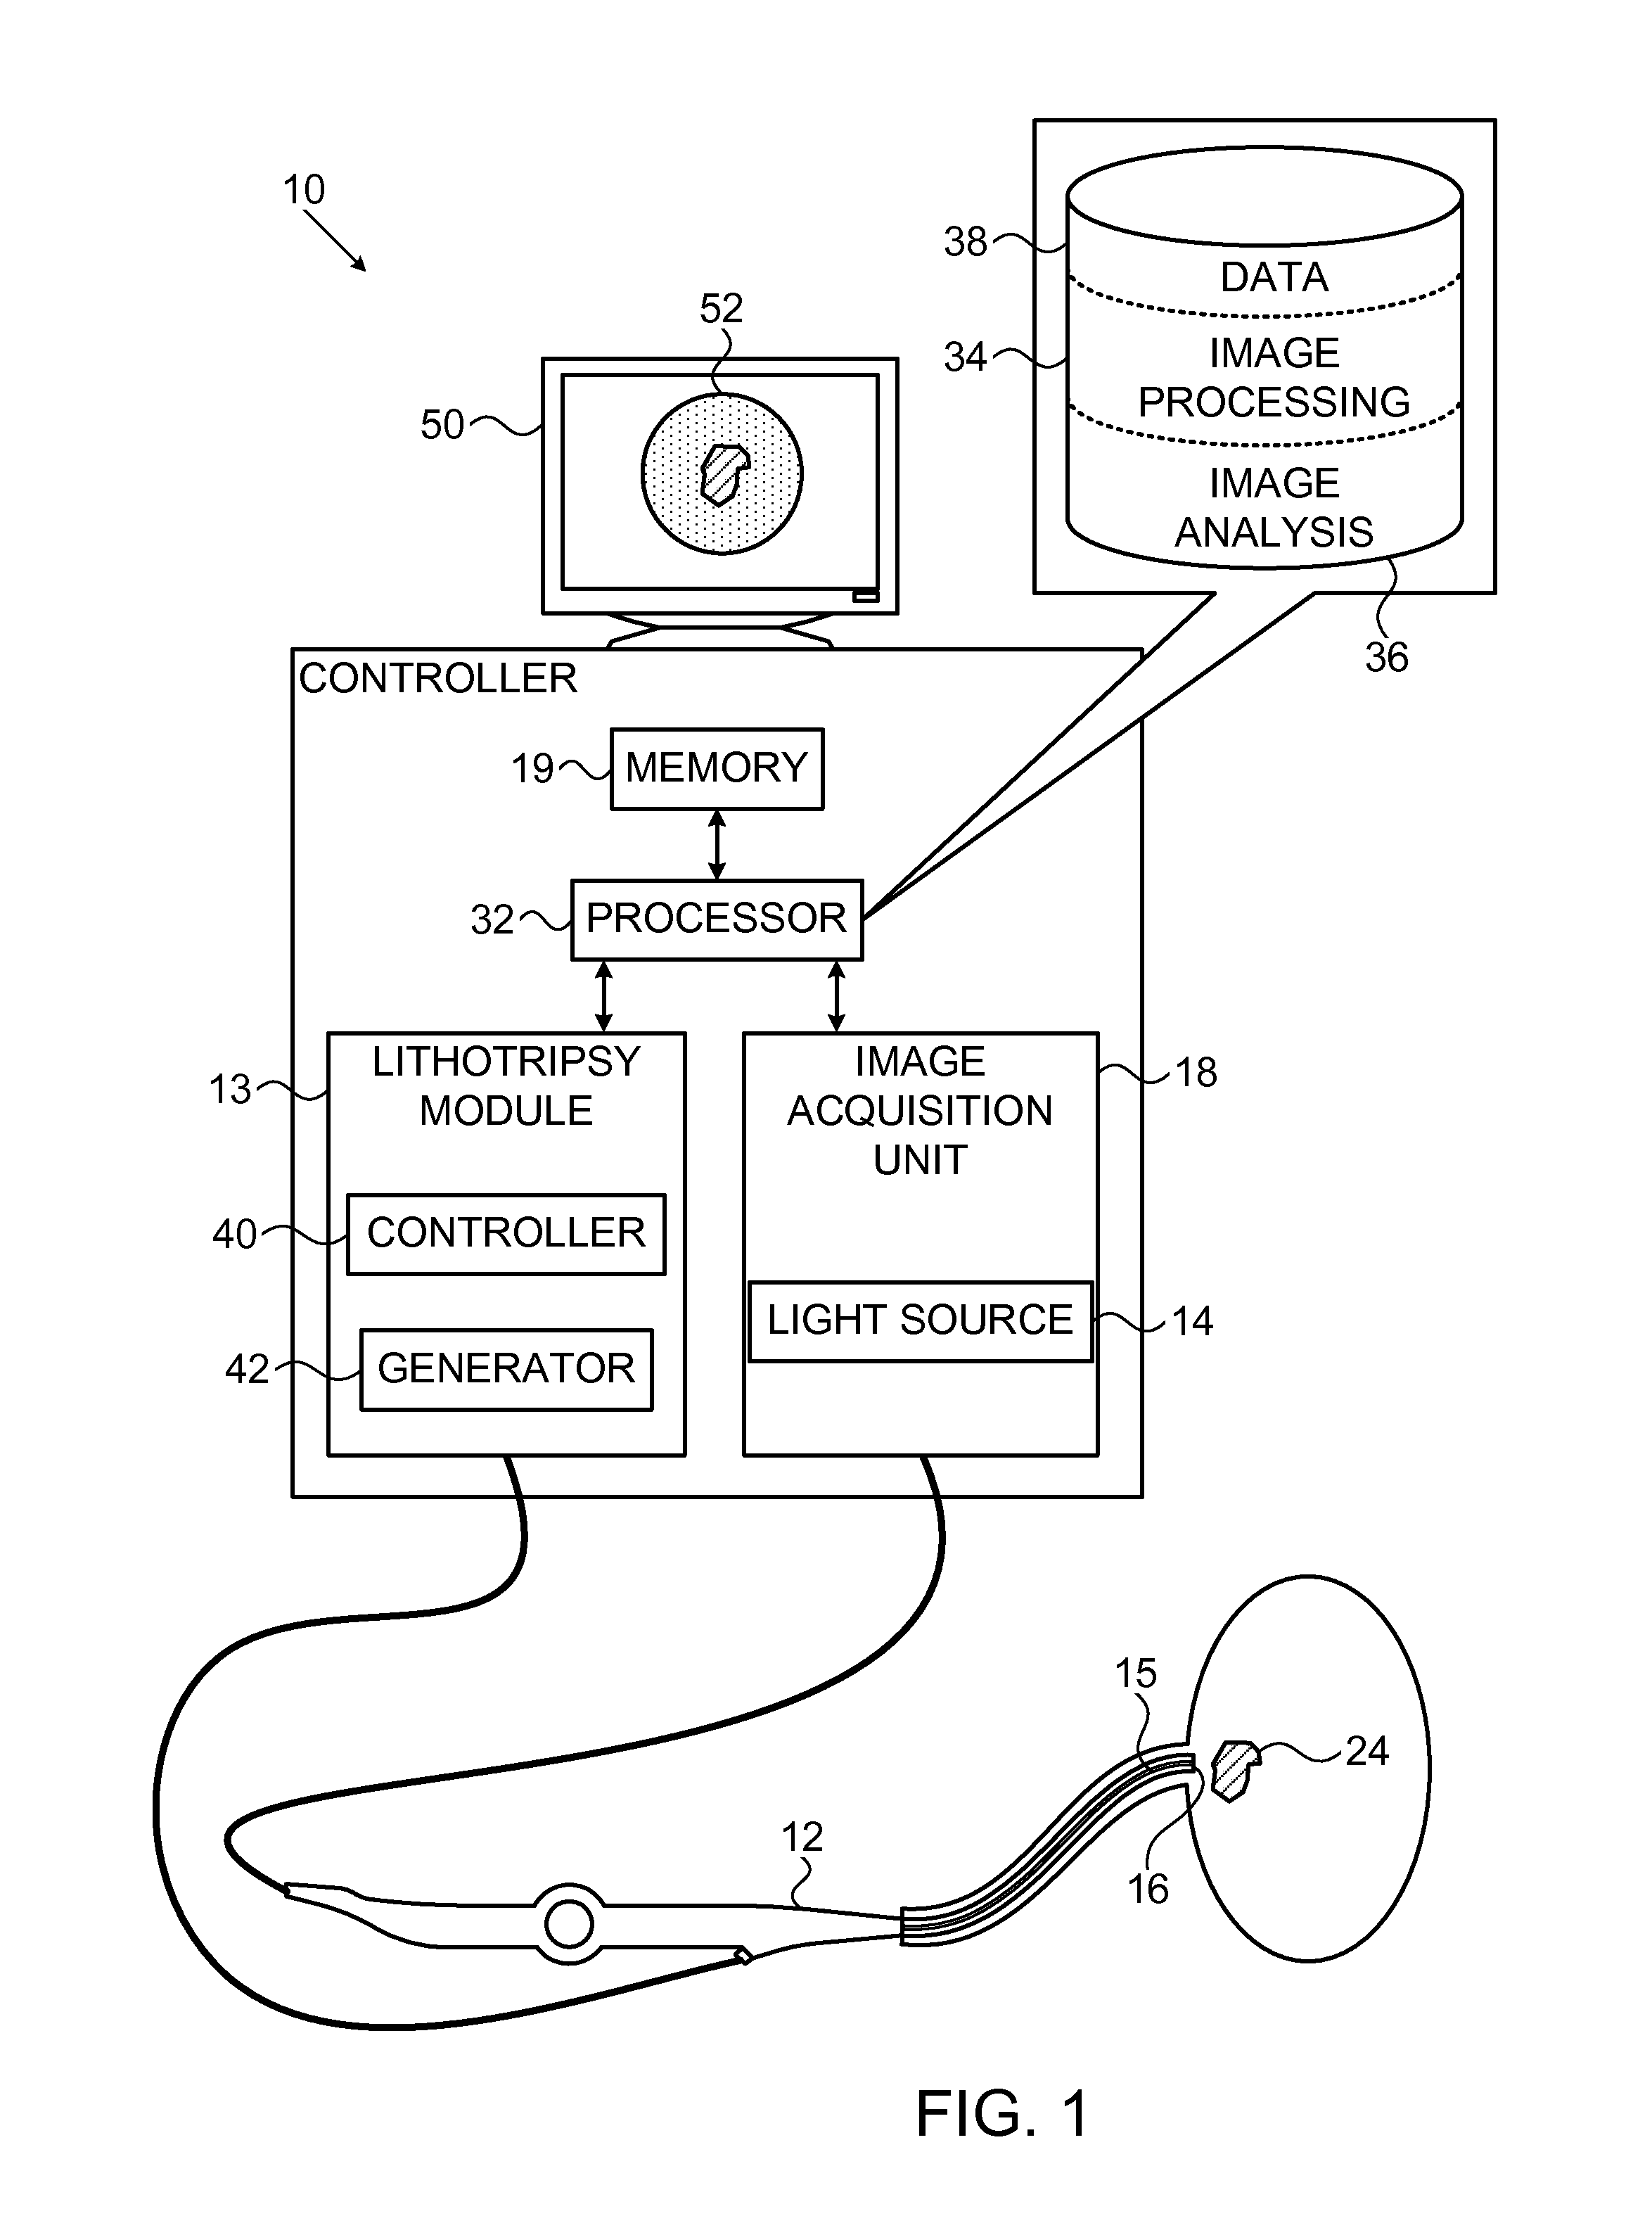 Computer aided image-based enhanced intracorporeal lithotripsy